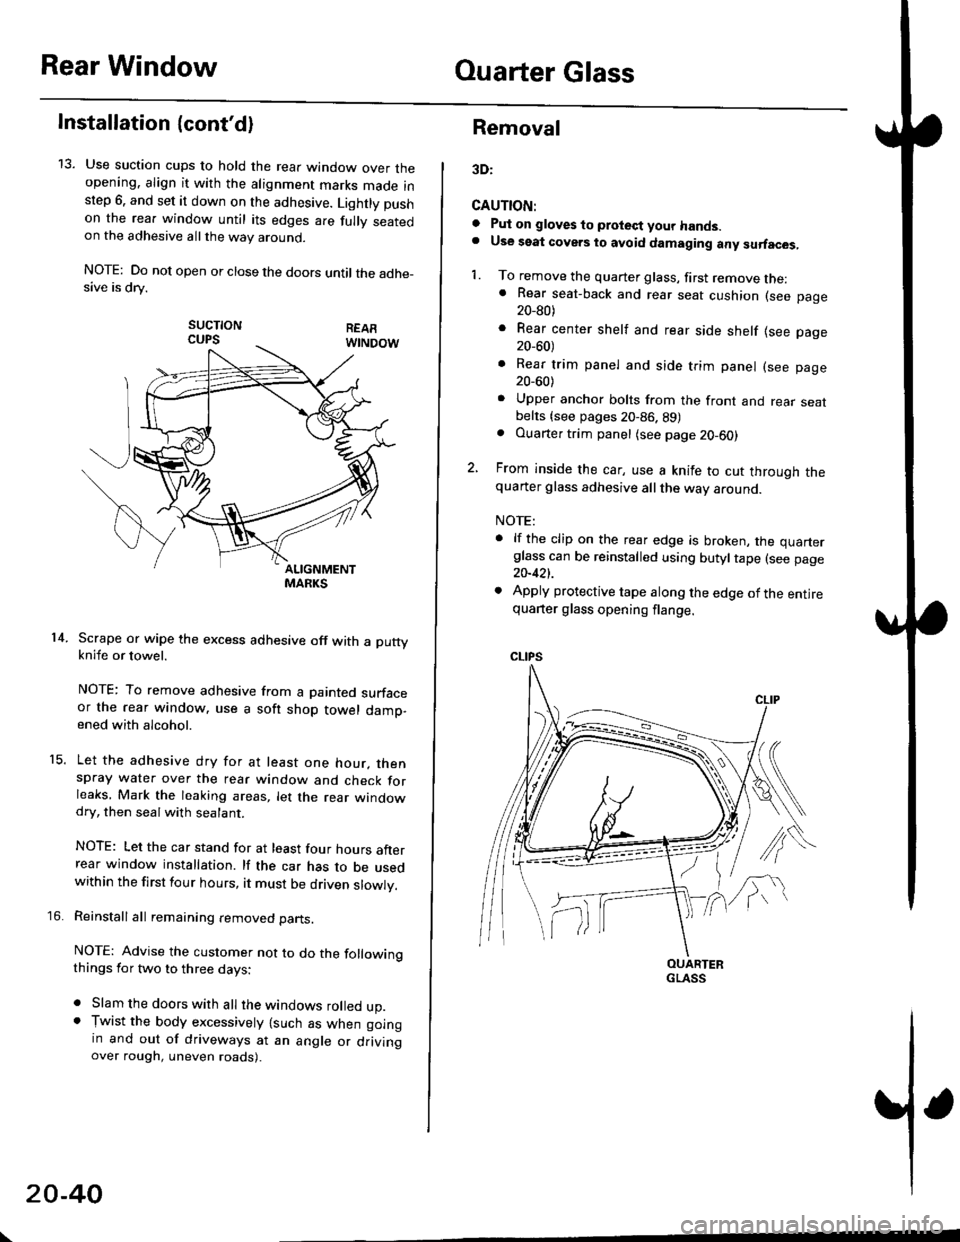 HONDA CIVIC 1998 6.G Workshop Manual Rear WindowOuarter Glass
Installation {contd)
13. Use suction cups to hold the rear window over theopening. align it with the alignment marks made inslep 6. and set it down on the adhesive. Lightly p